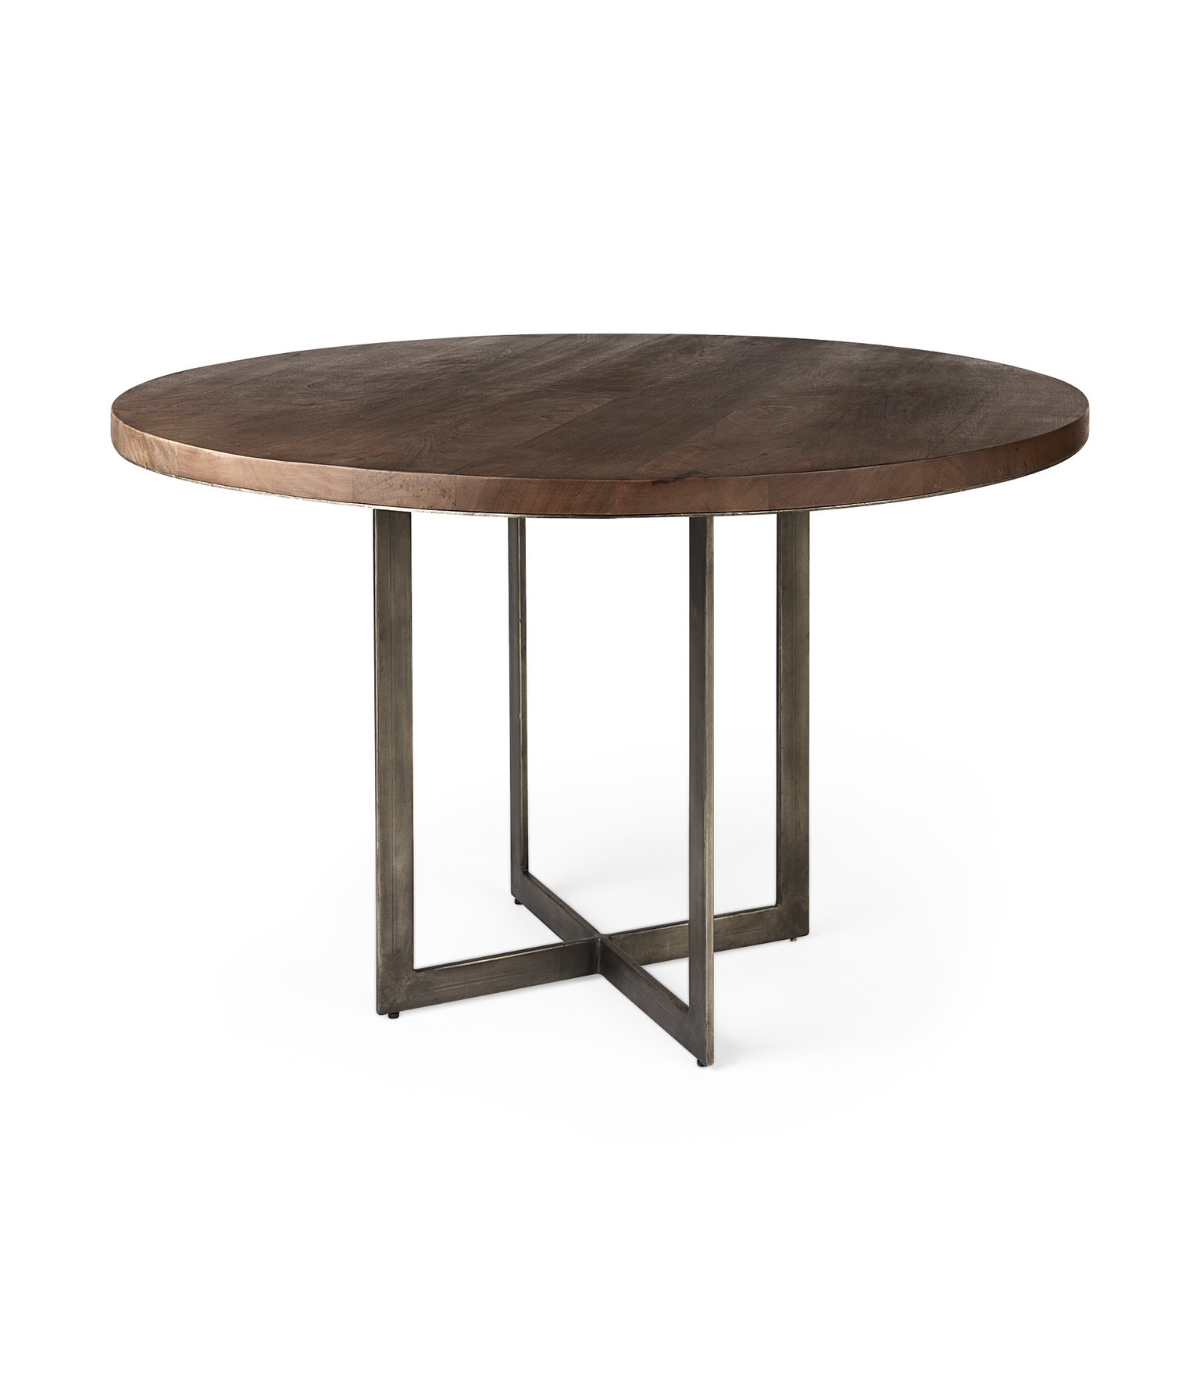 Faye Round Dining Table